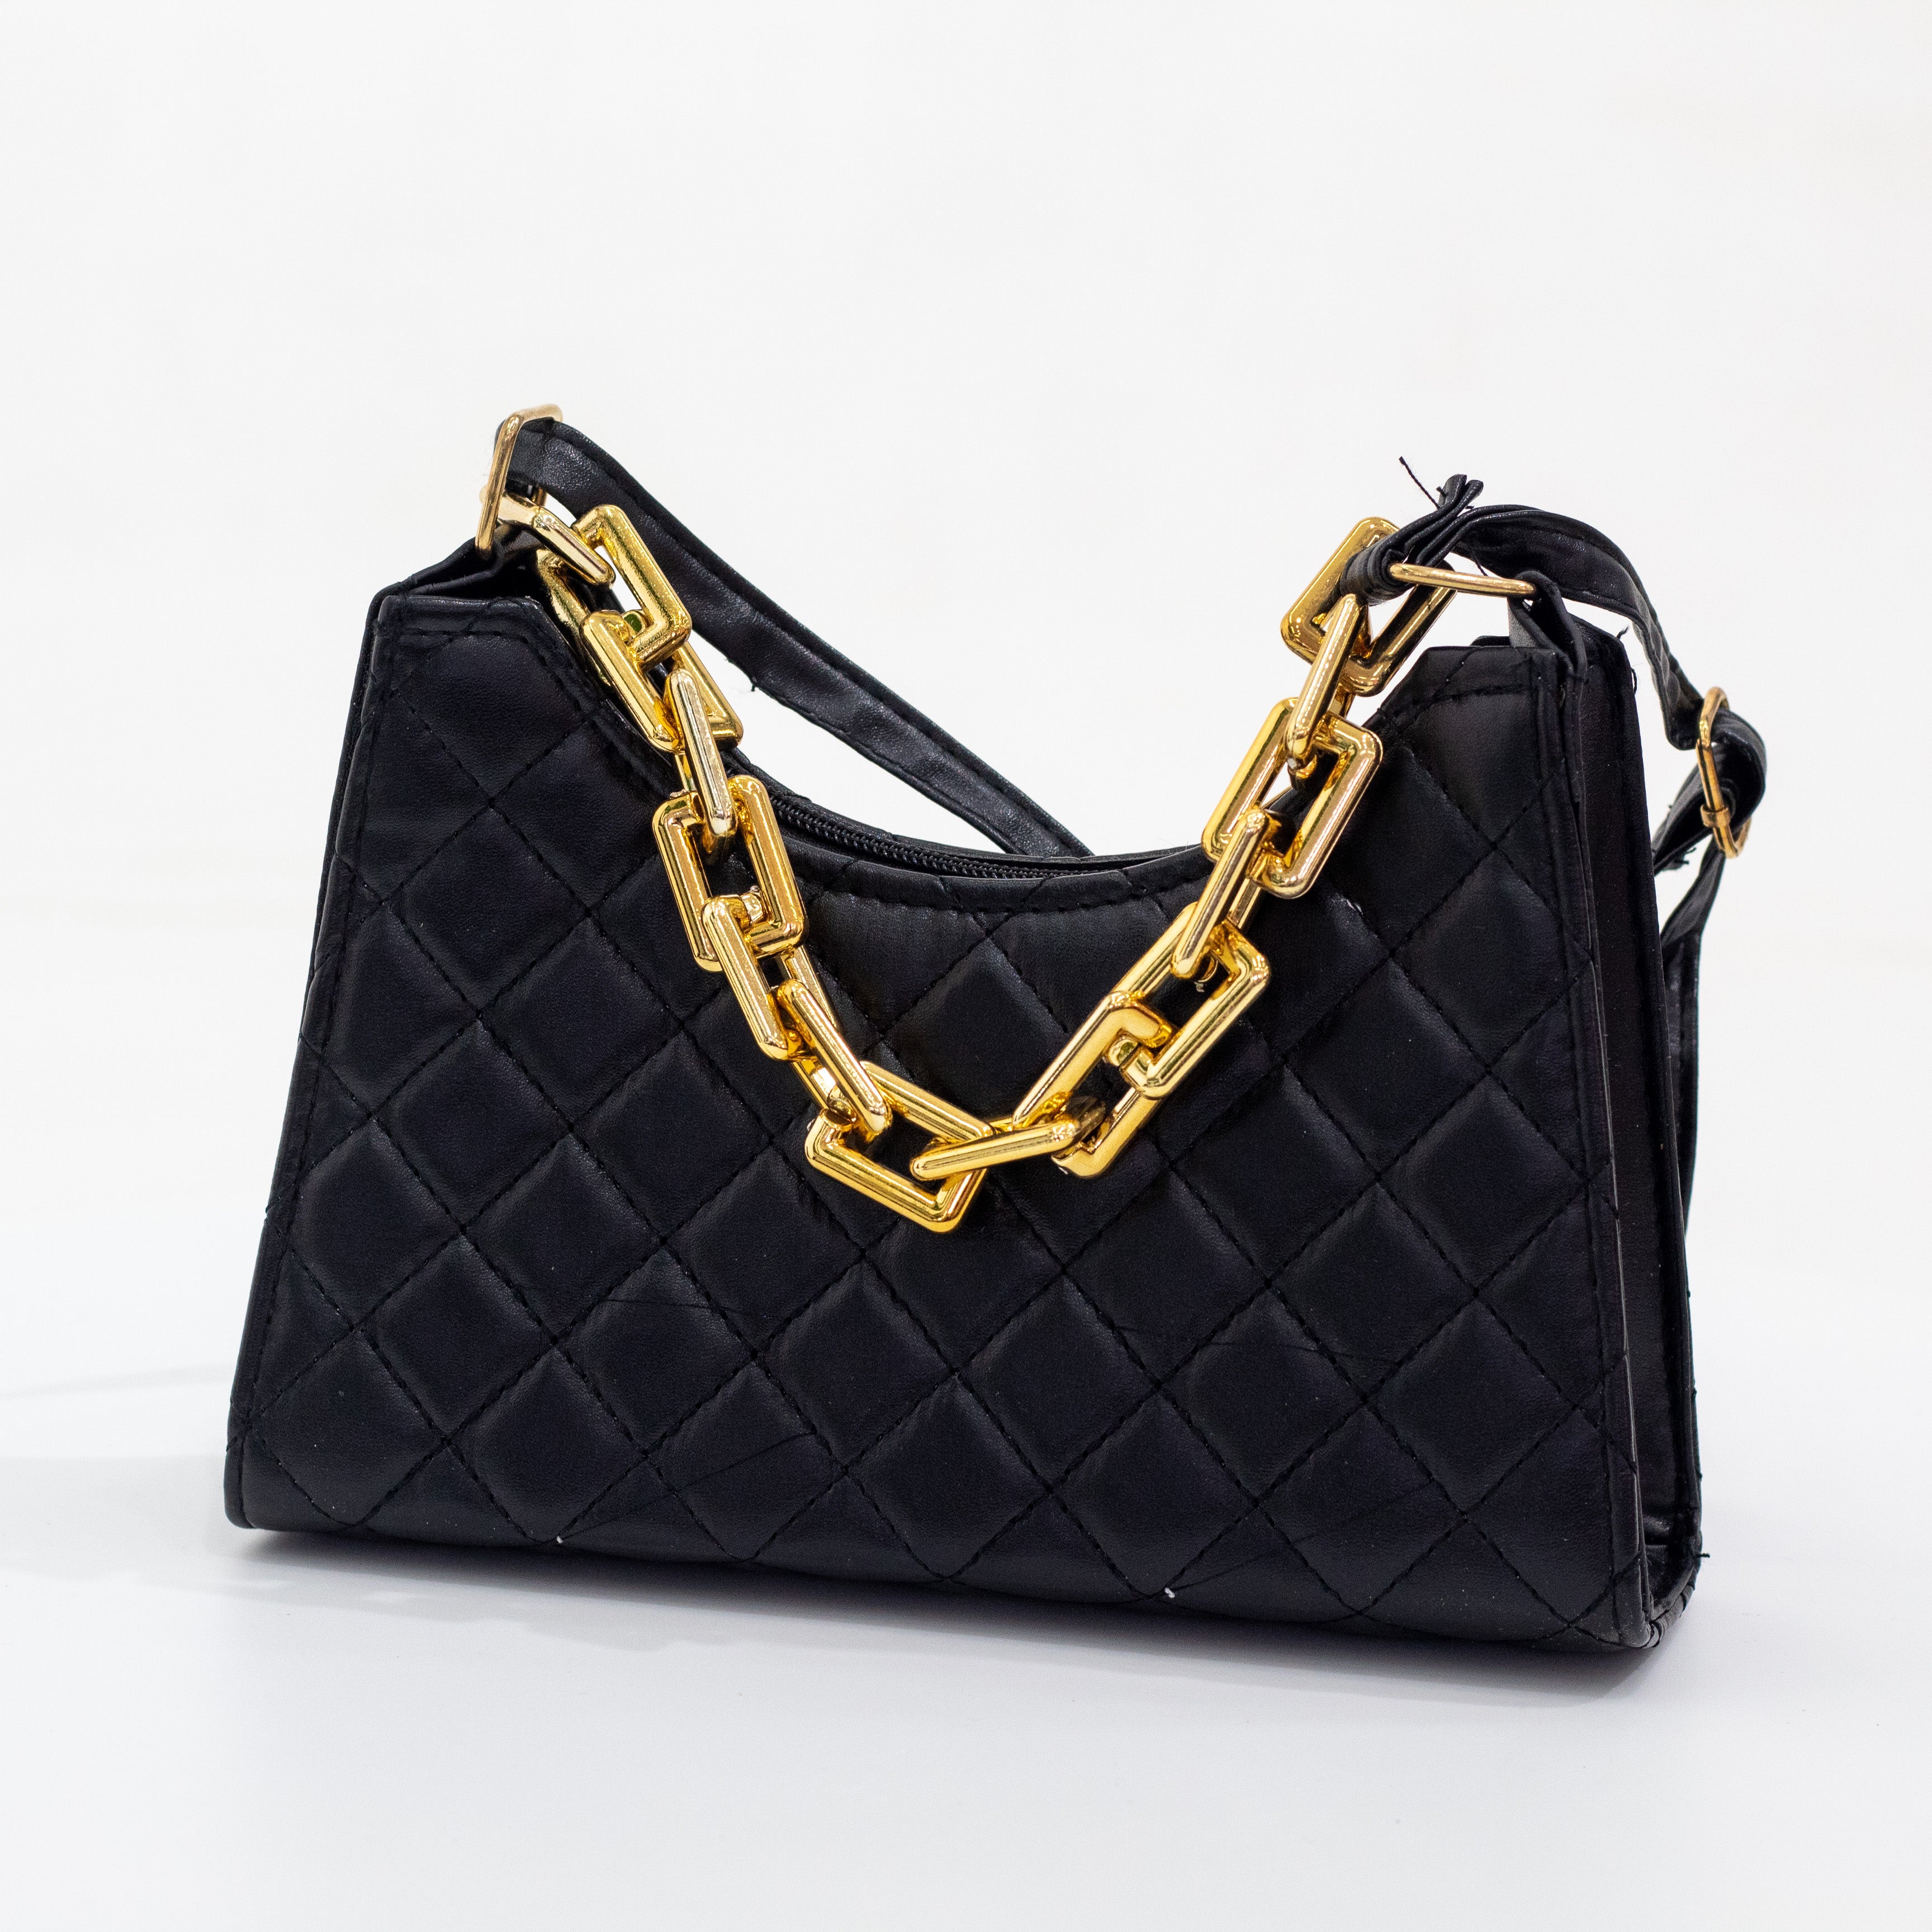 Black weaved clutch bag with gold chain galina